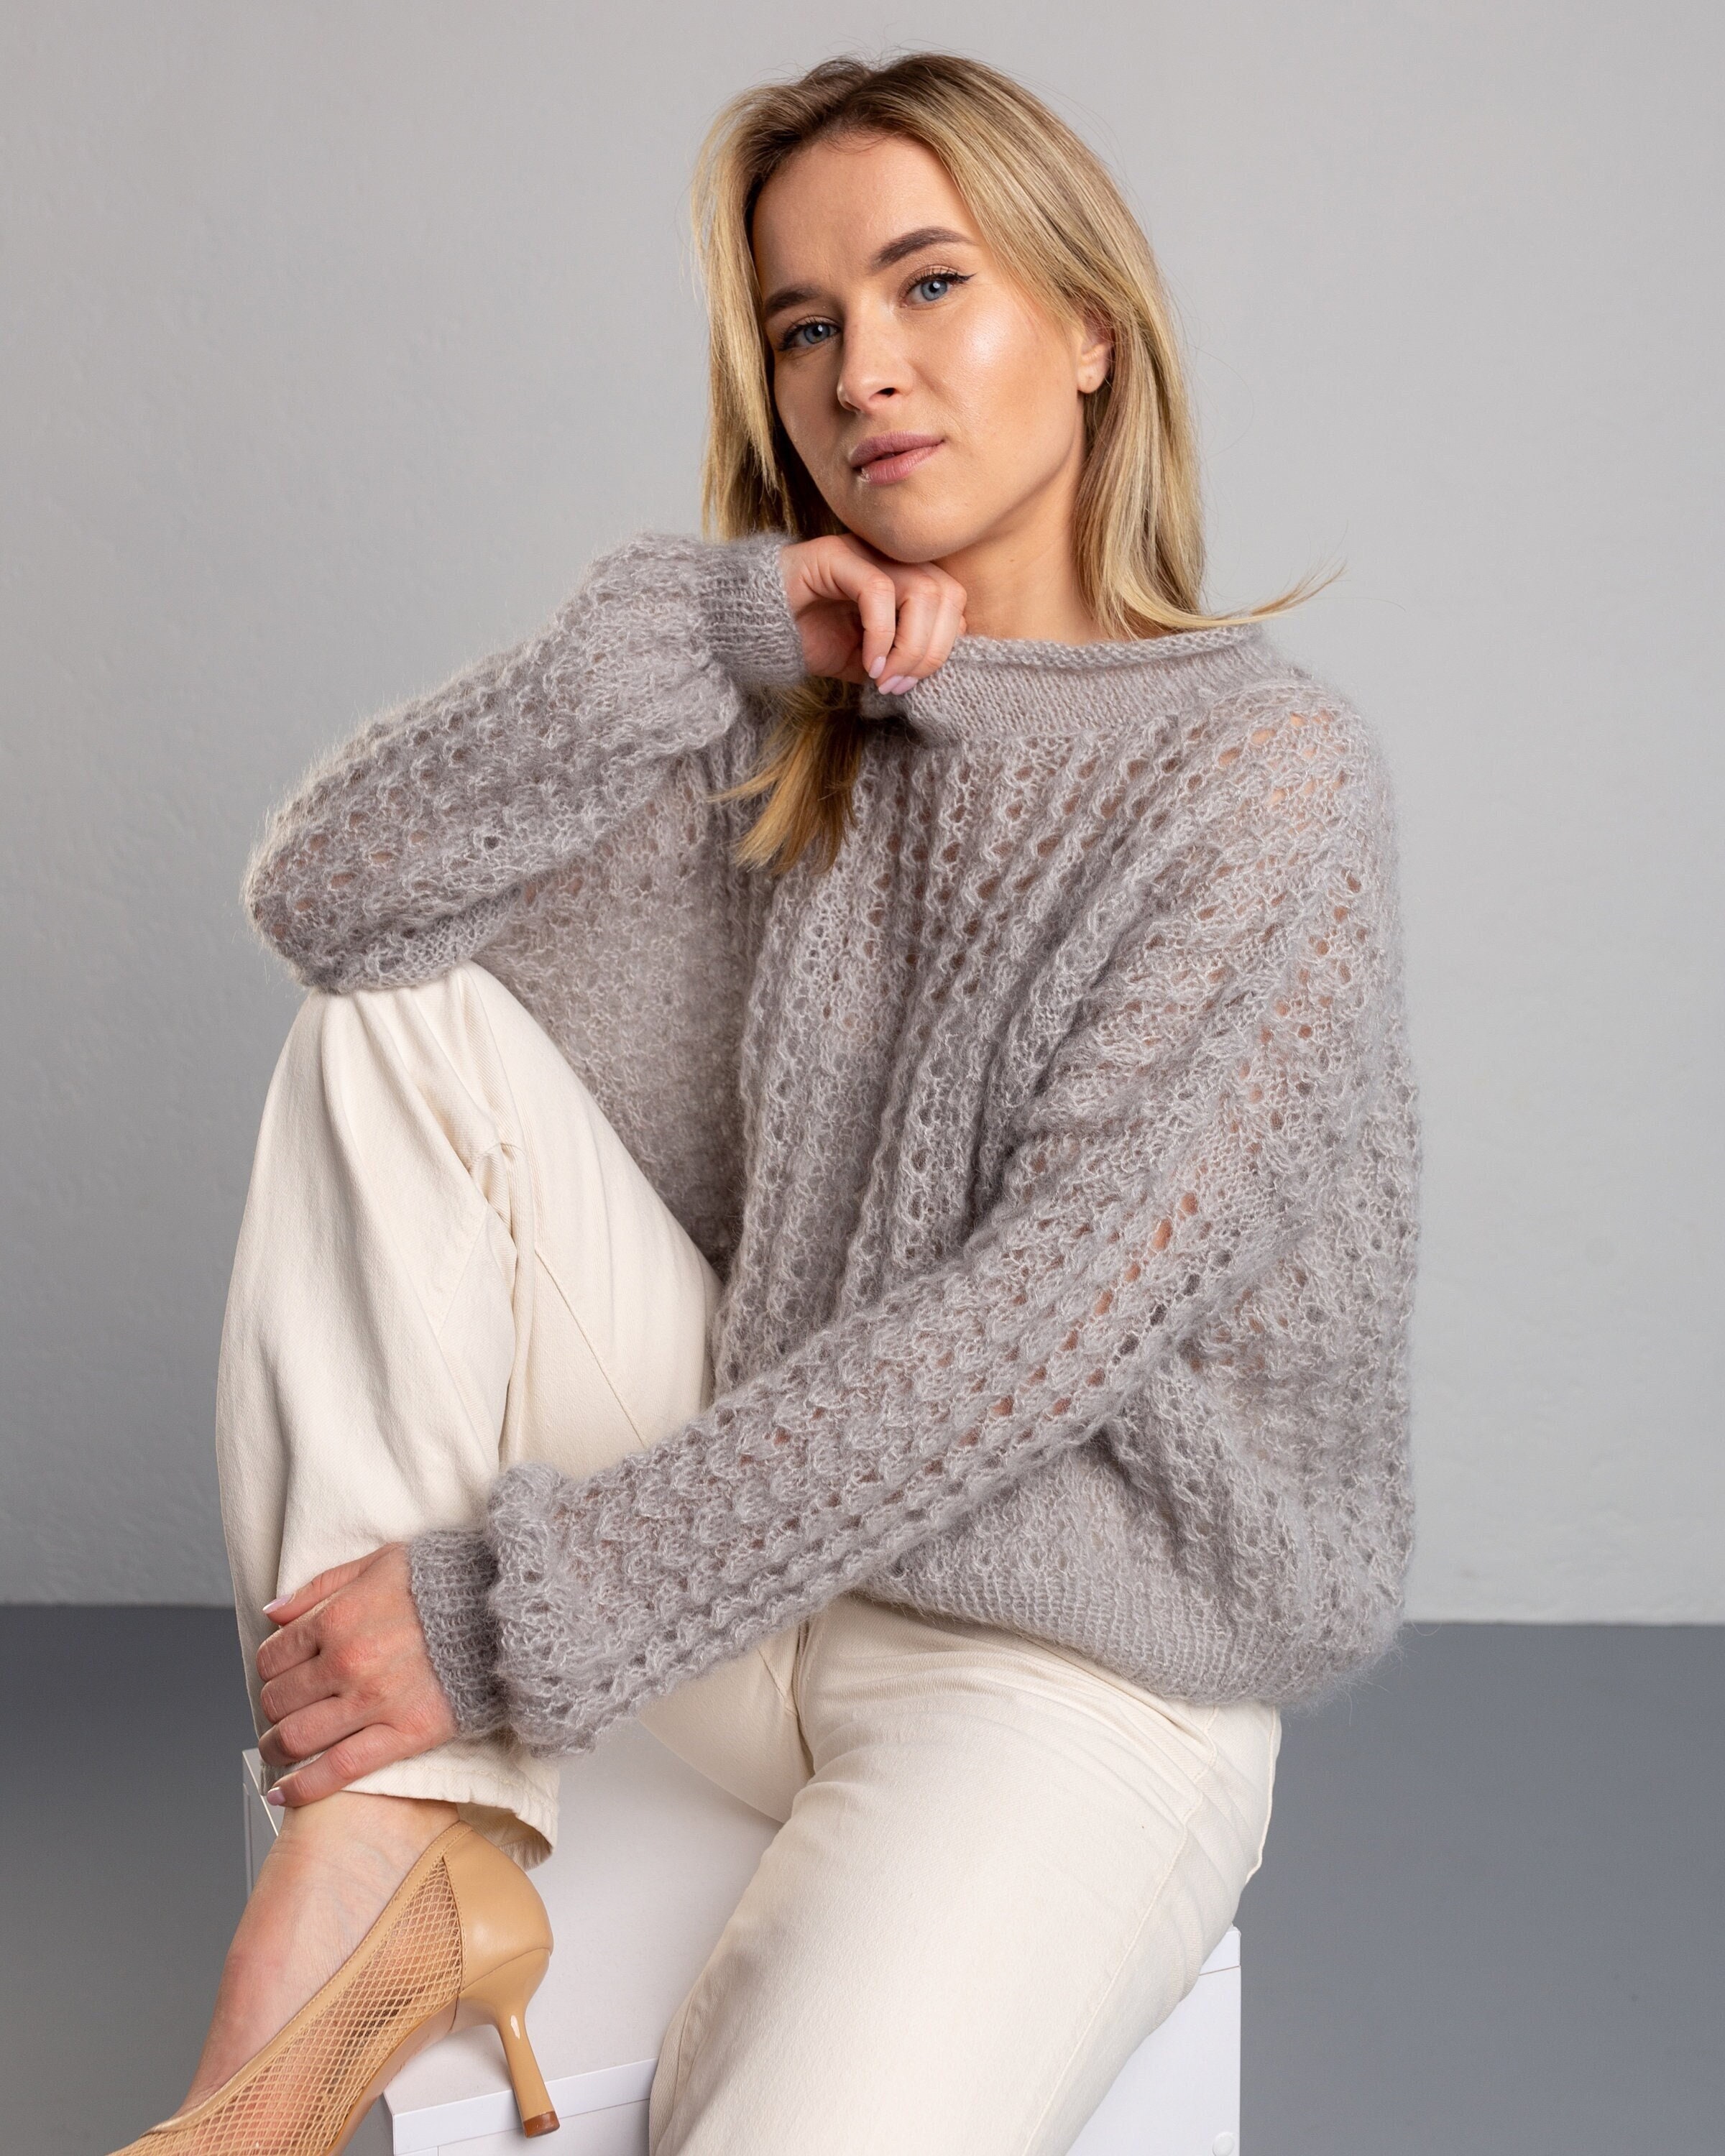 Crochet Mohair Sweater Chunky Knit Sweater Knitted - Etsy